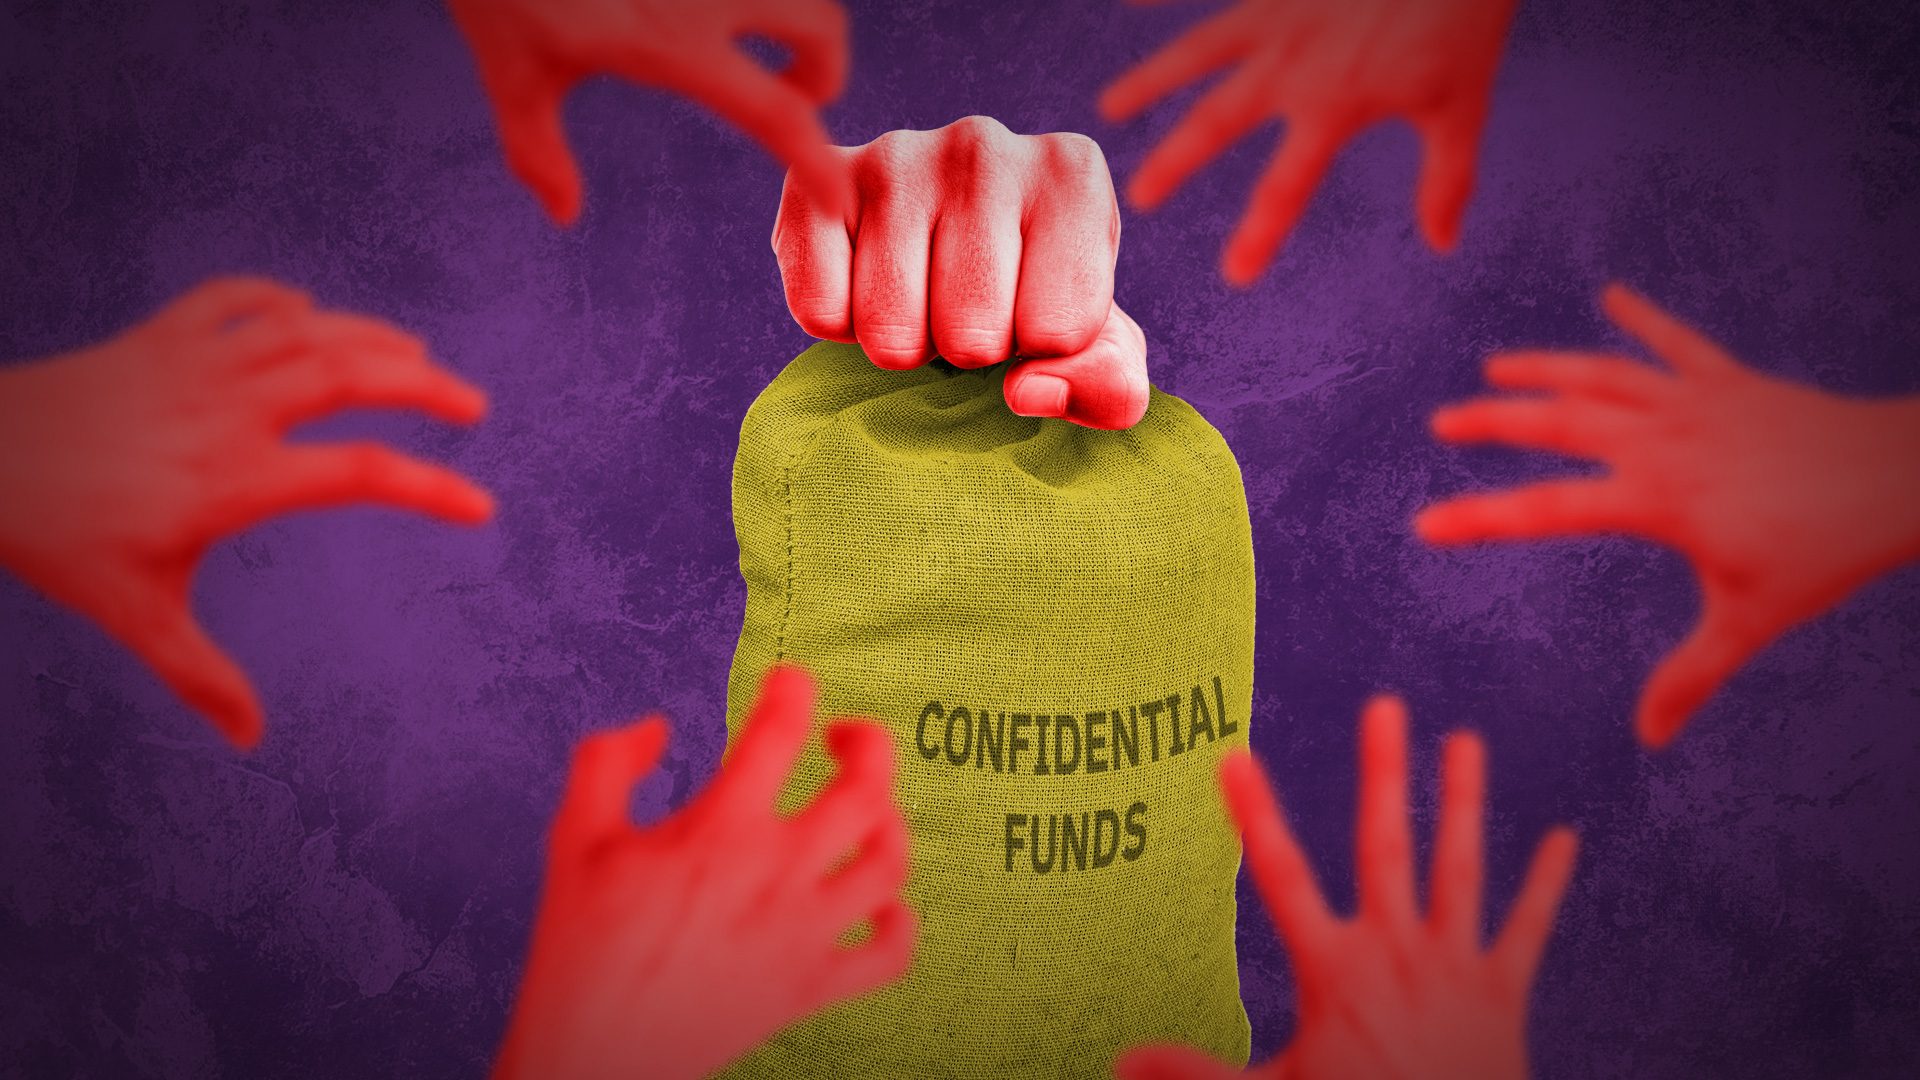 [OPINION] The Duterte legacy: Confidential funds